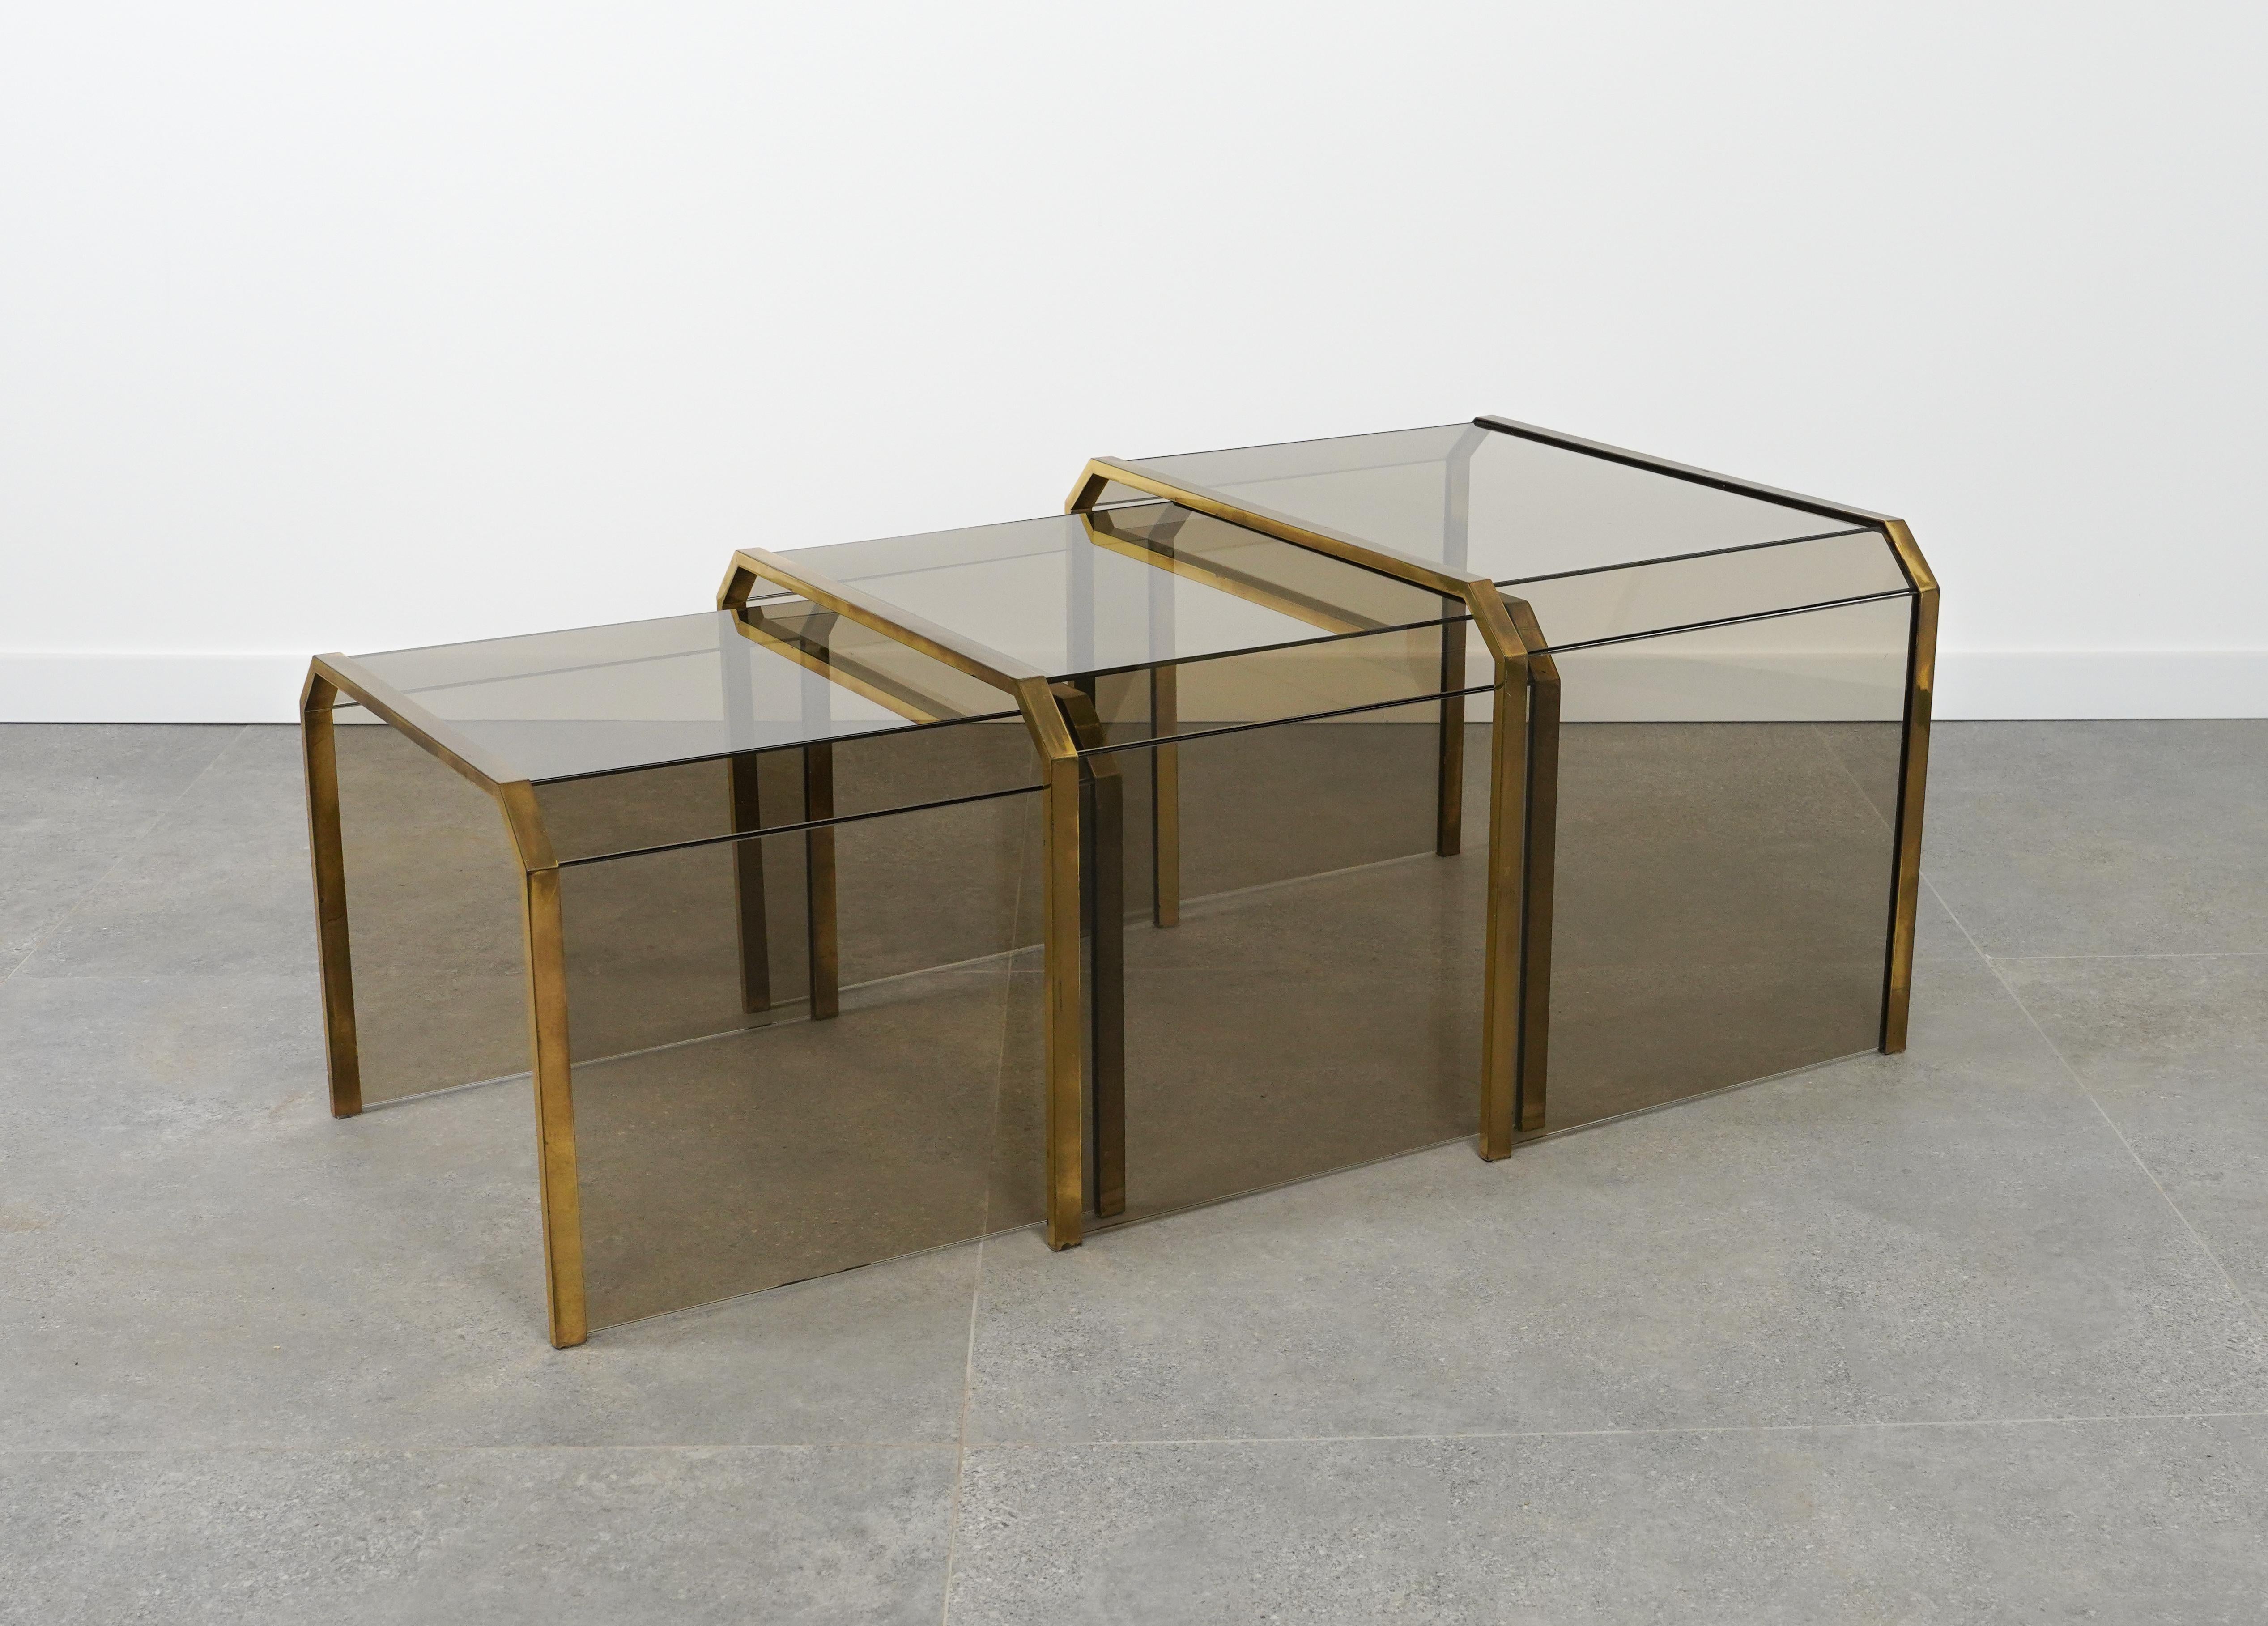 Brass & Glass Set of Three Nesting Tables Gallotti & Radice Style, Italy 1970s For Sale 4